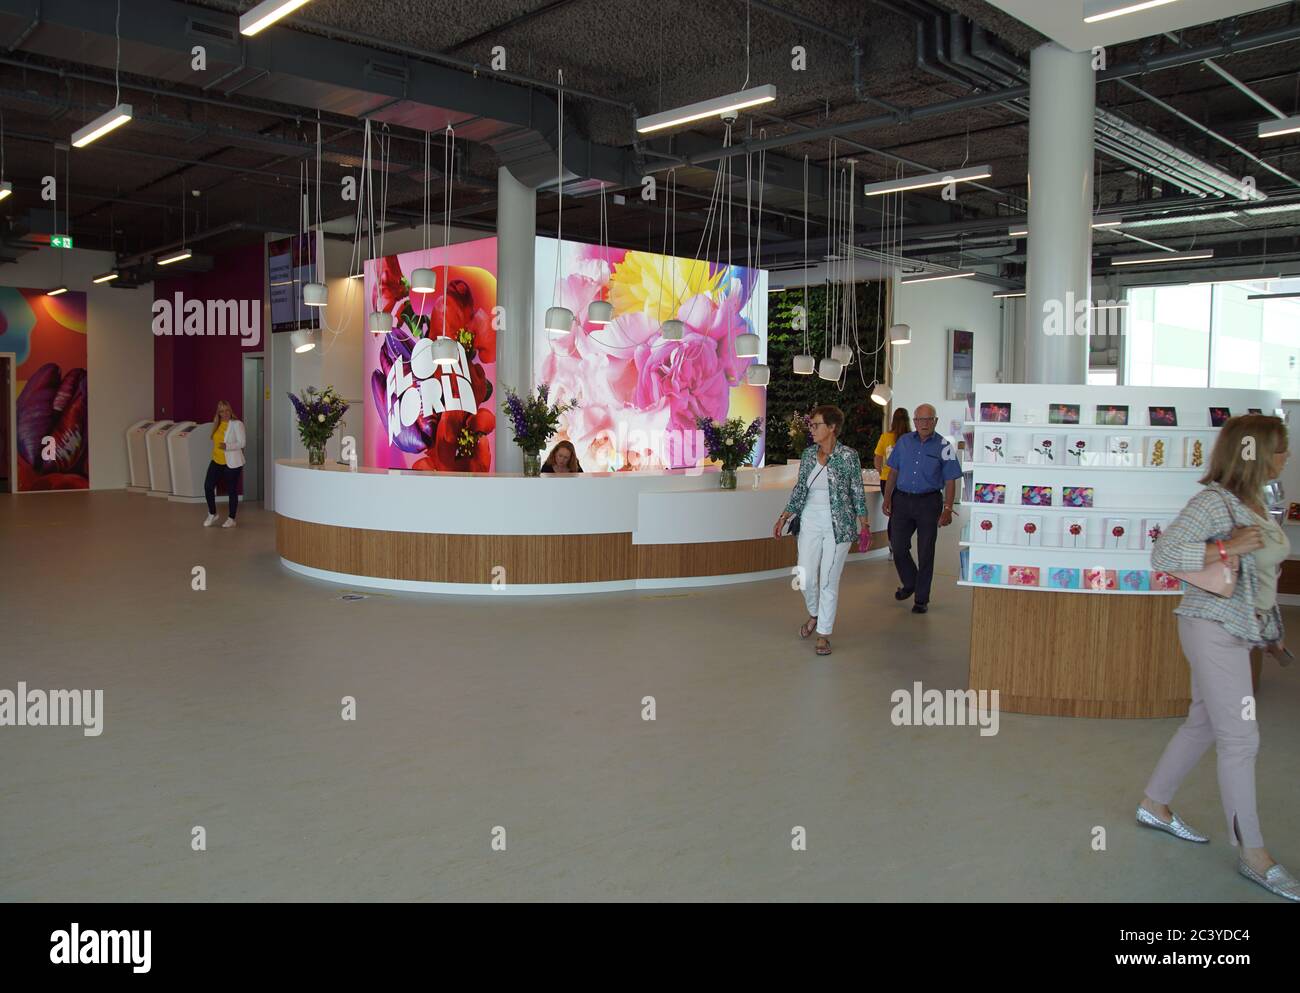 Aalsmeer, Netherlands, June 22, 2020: The entrance of the building FloriWorld with a reception for visitors. Stock Photo